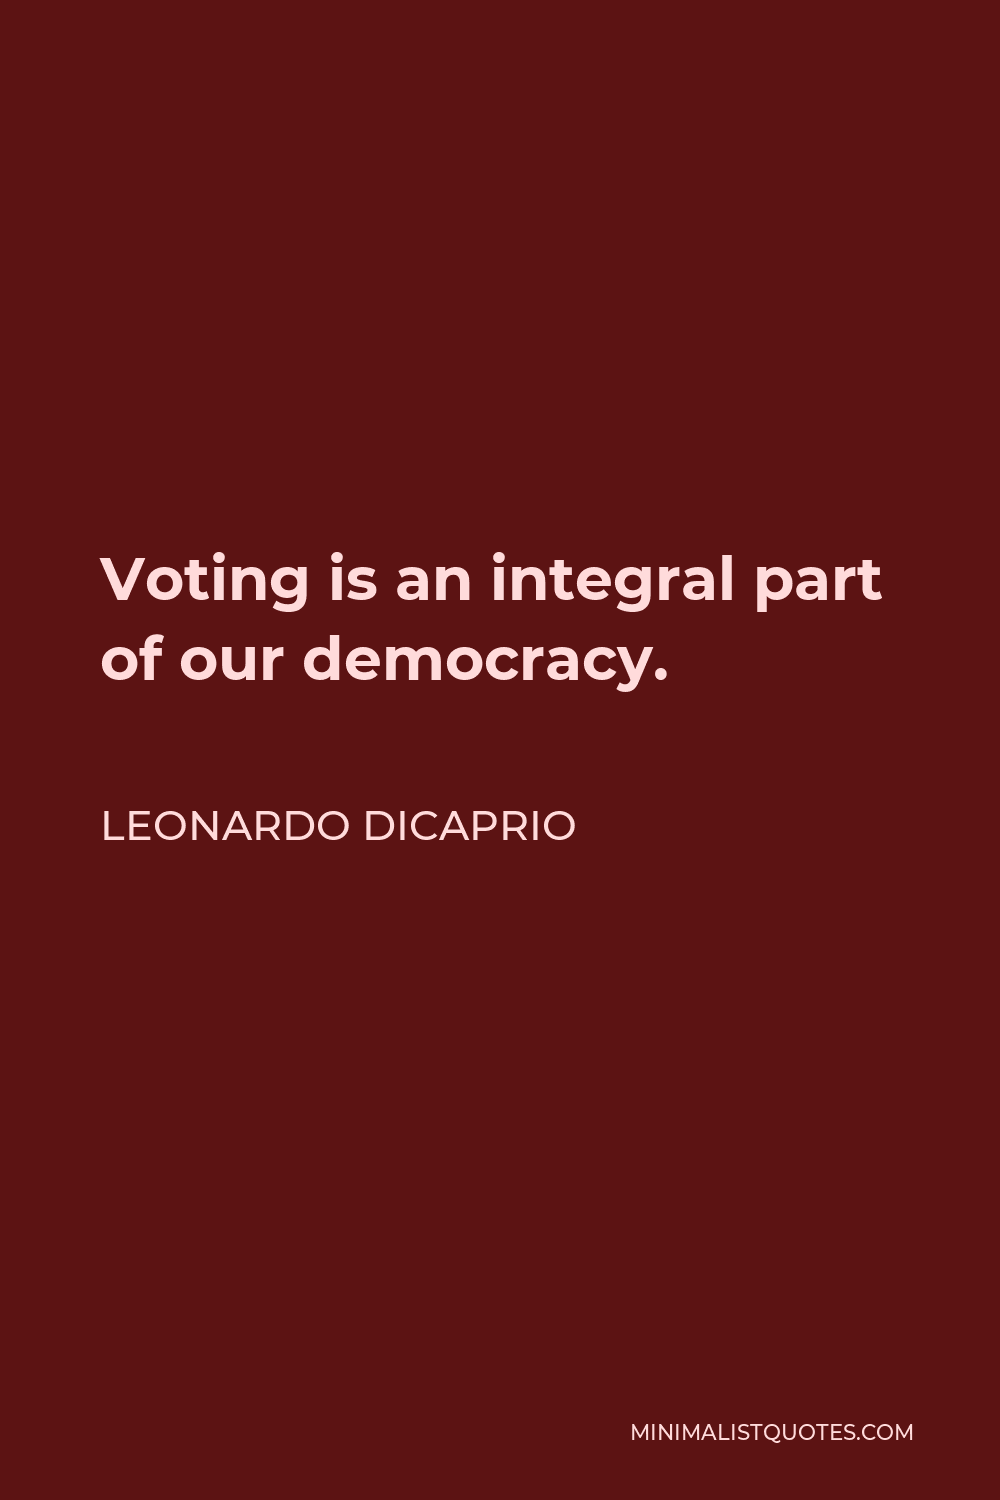 Leonardo DiCaprio Quote - Voting is an integral part of our democracy.